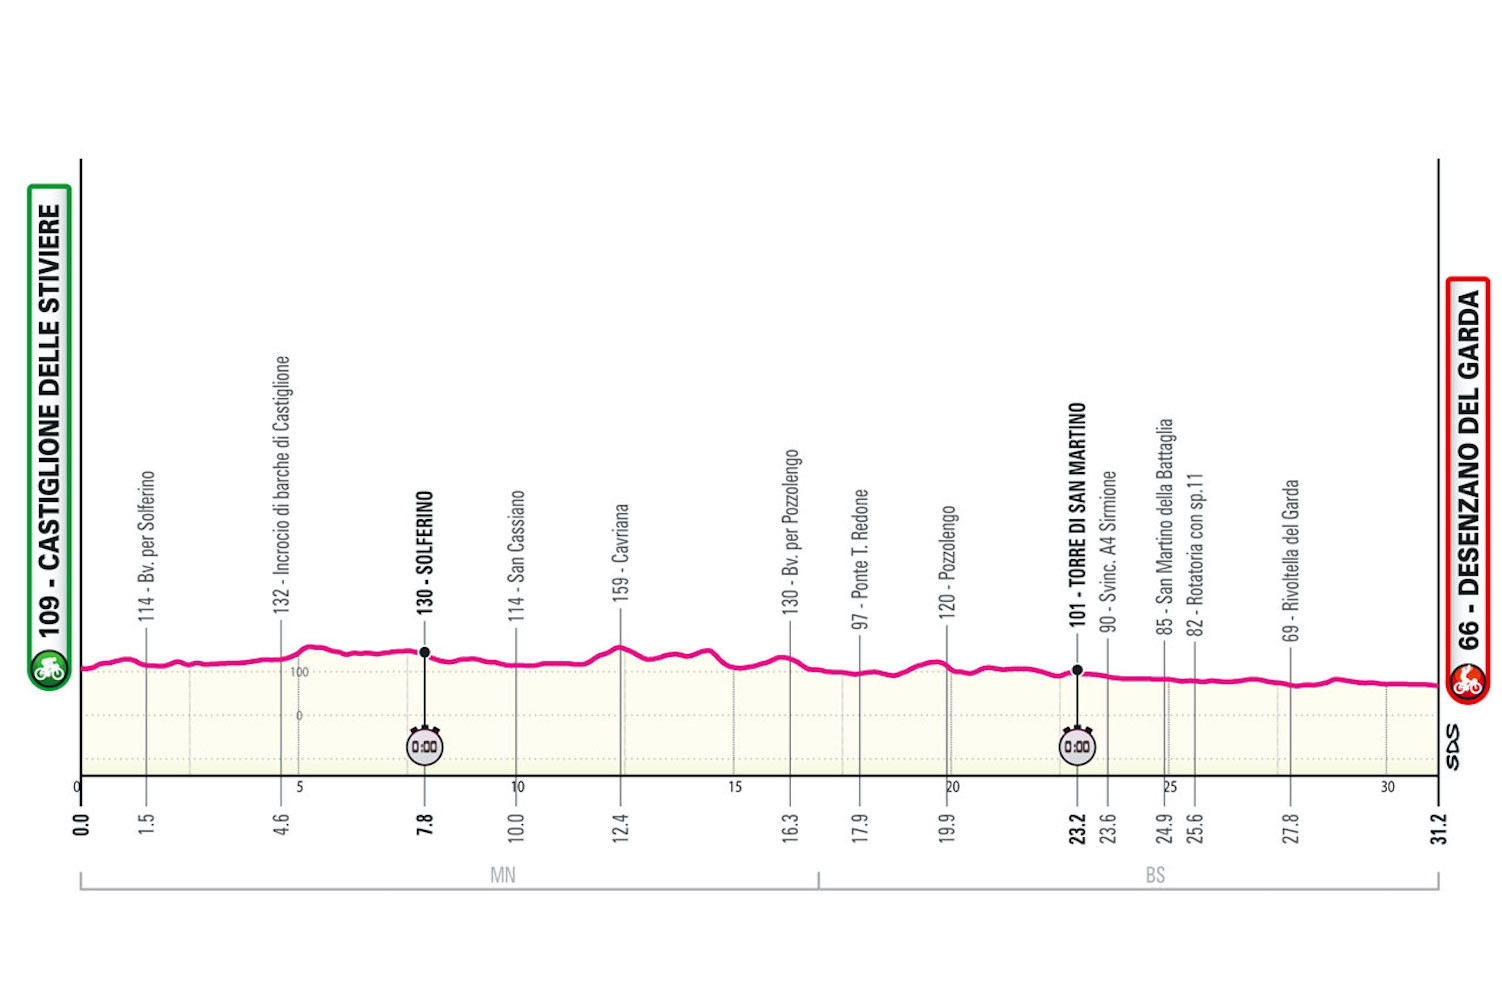 The profile of stage 14 of the Giro d'Italia.